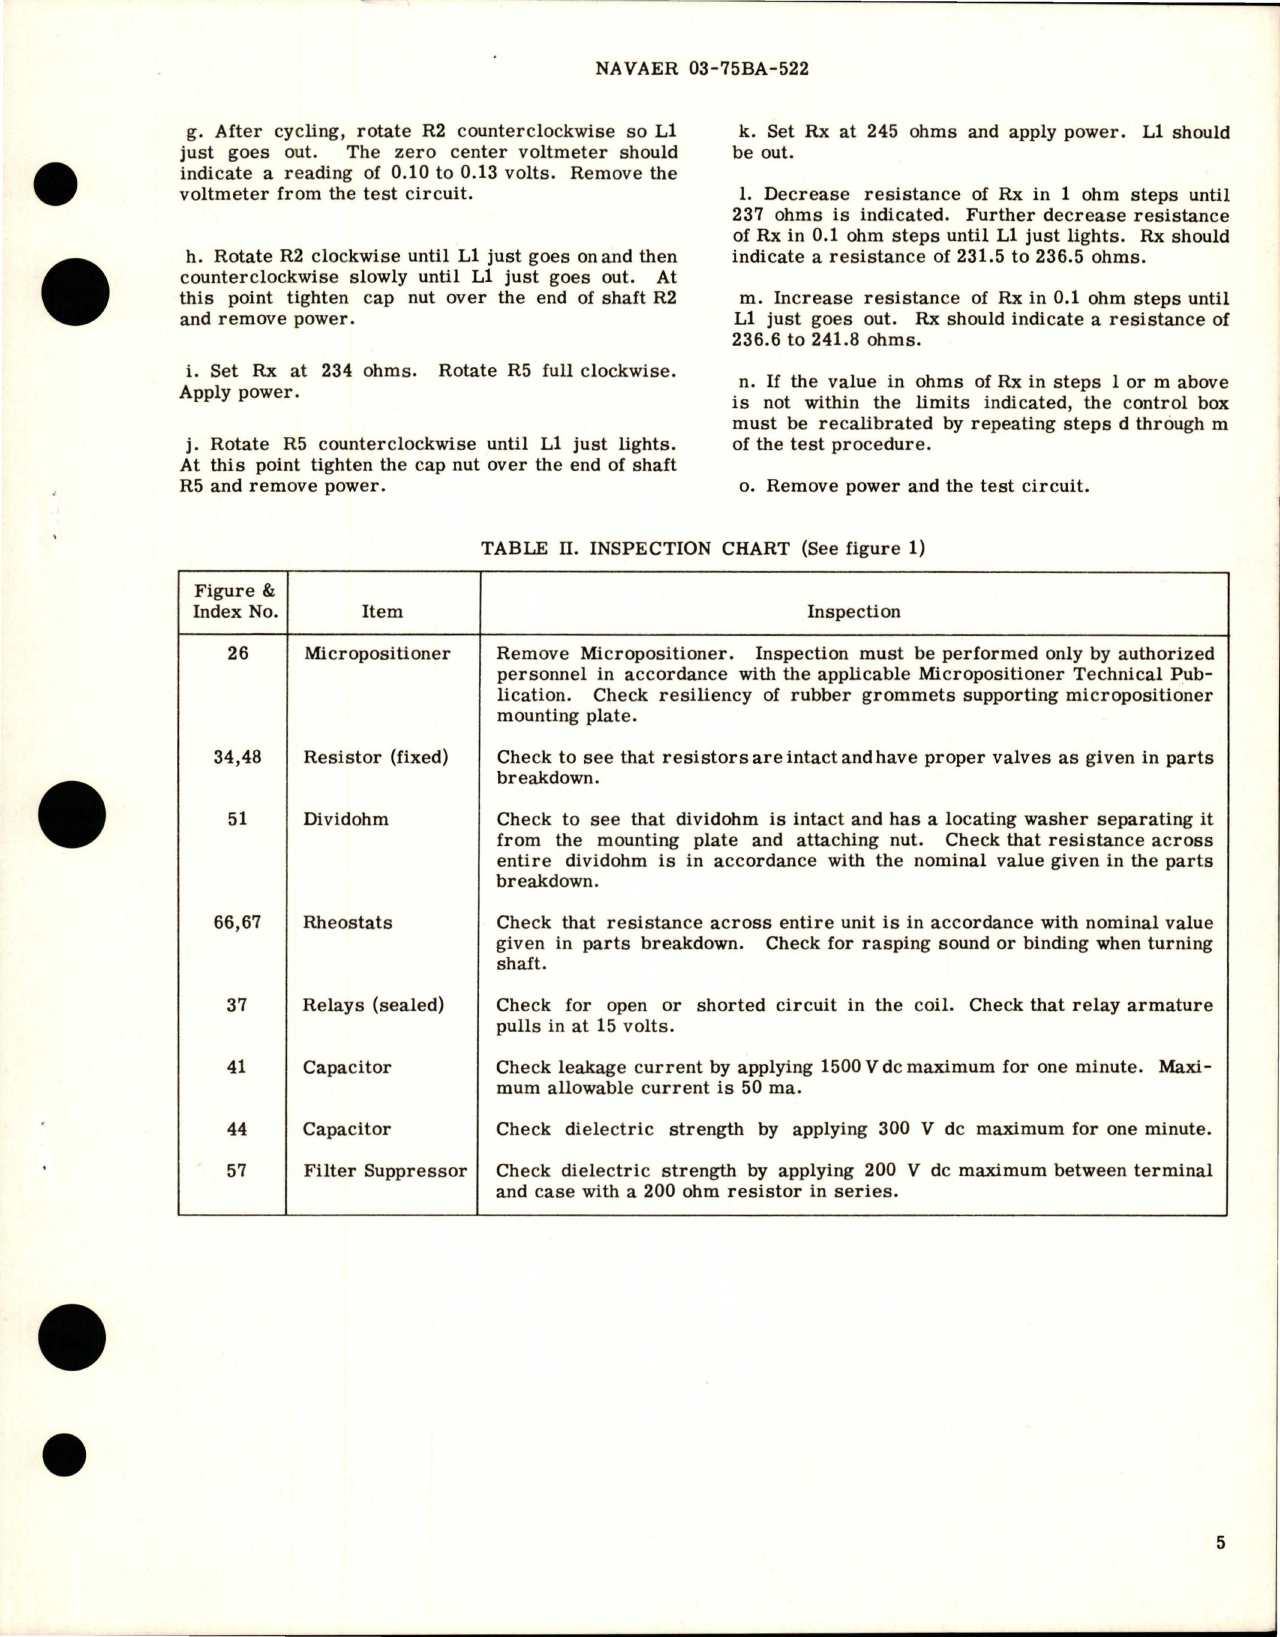 Sample page 5 from AirCorps Library document: Overhaul Instructions with Parts Breakdown for Heater Cycling Control Box - CYLZ 3923 